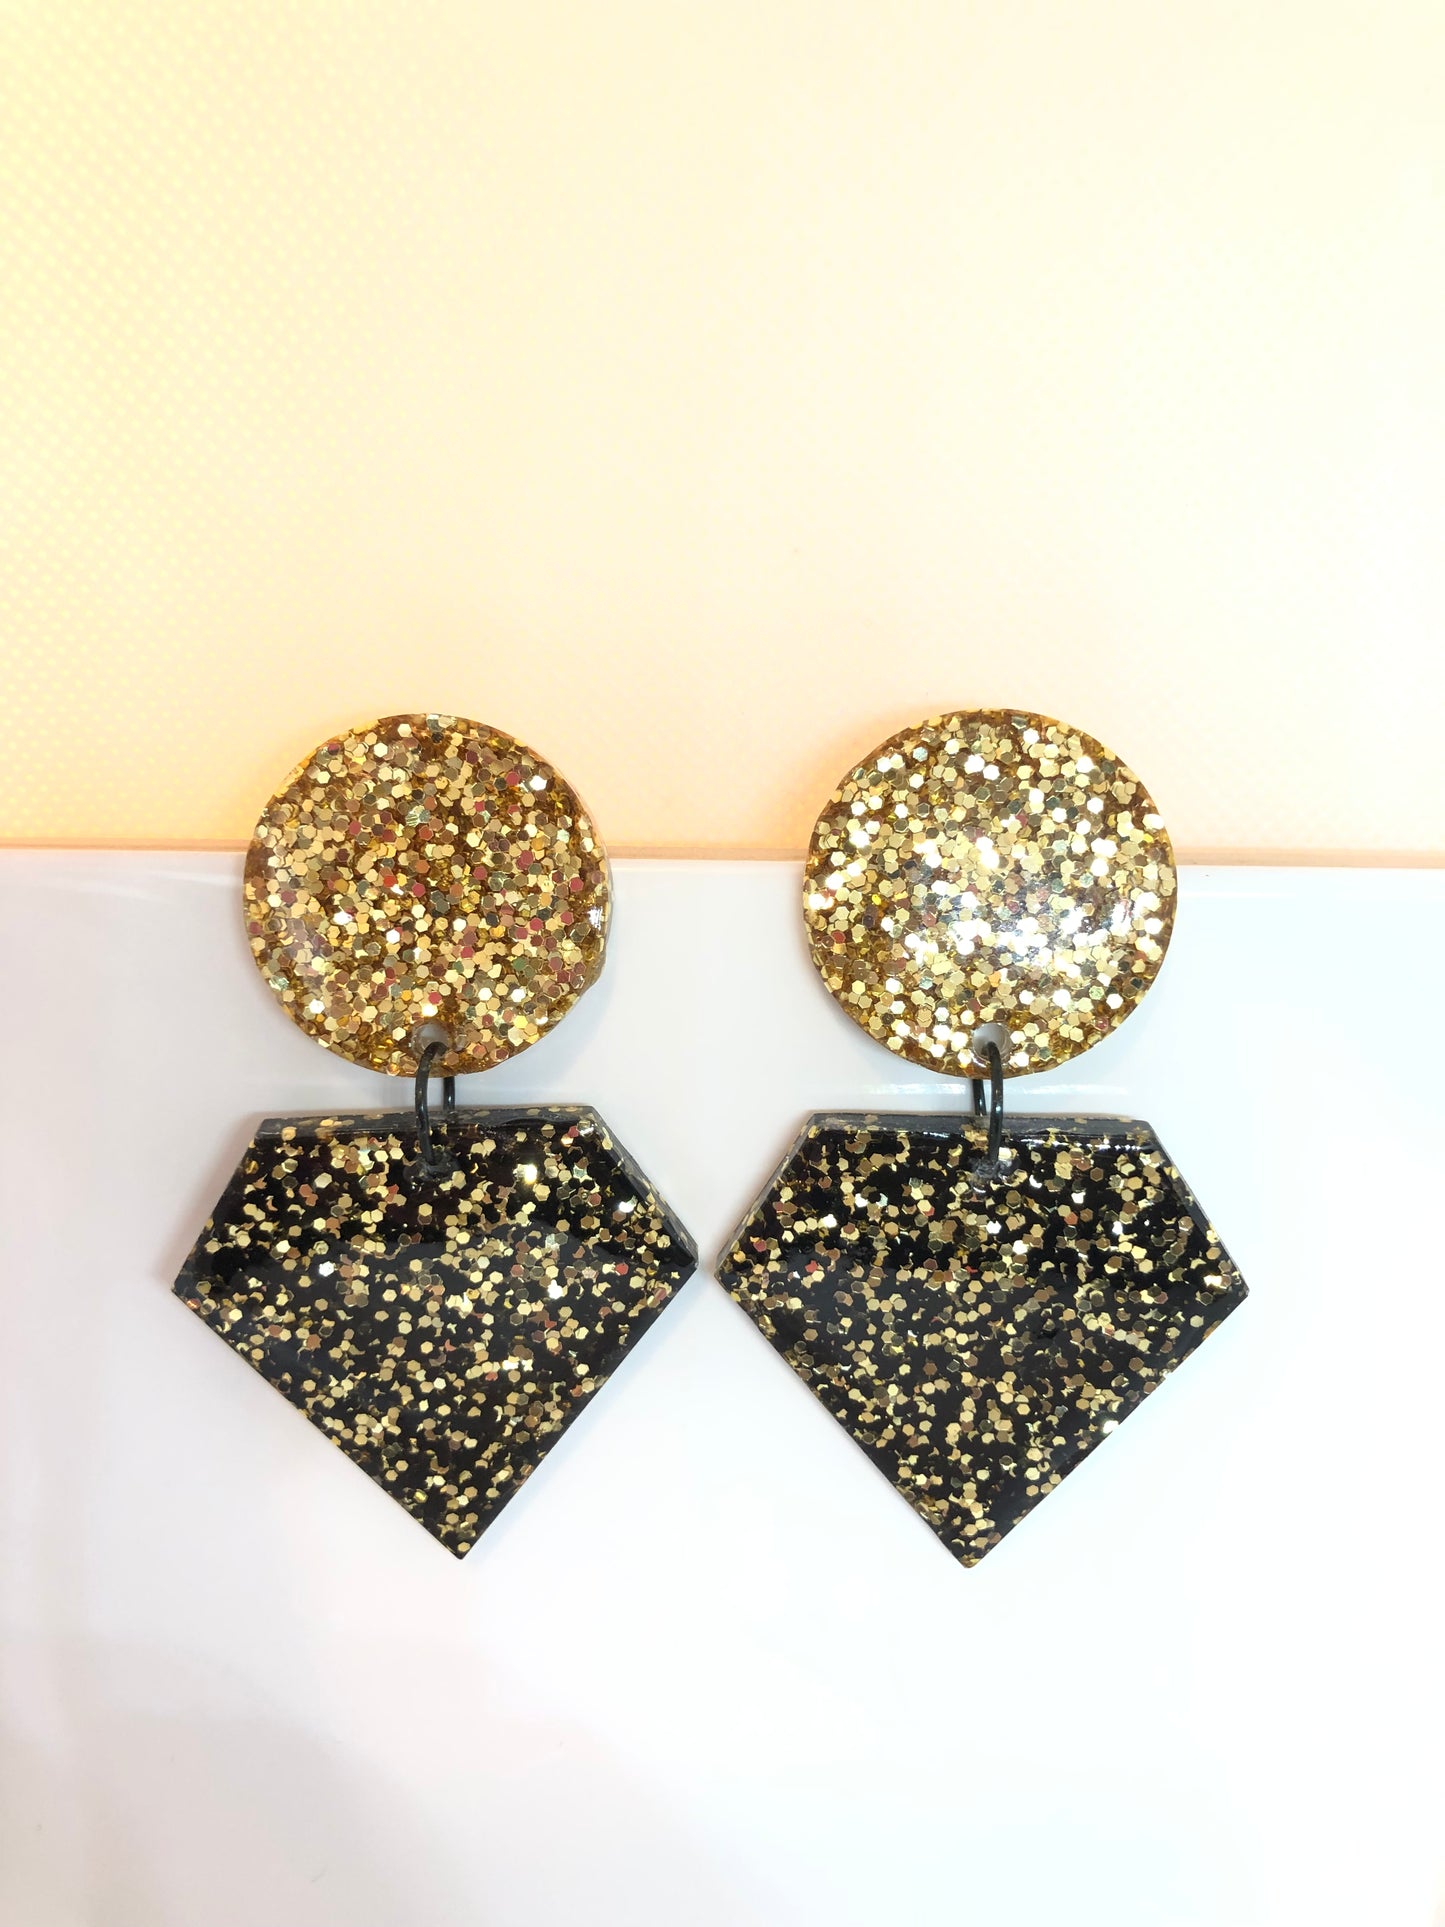 Queen Royalty Glitter Black and Gold Color Studs #1 - lightweight